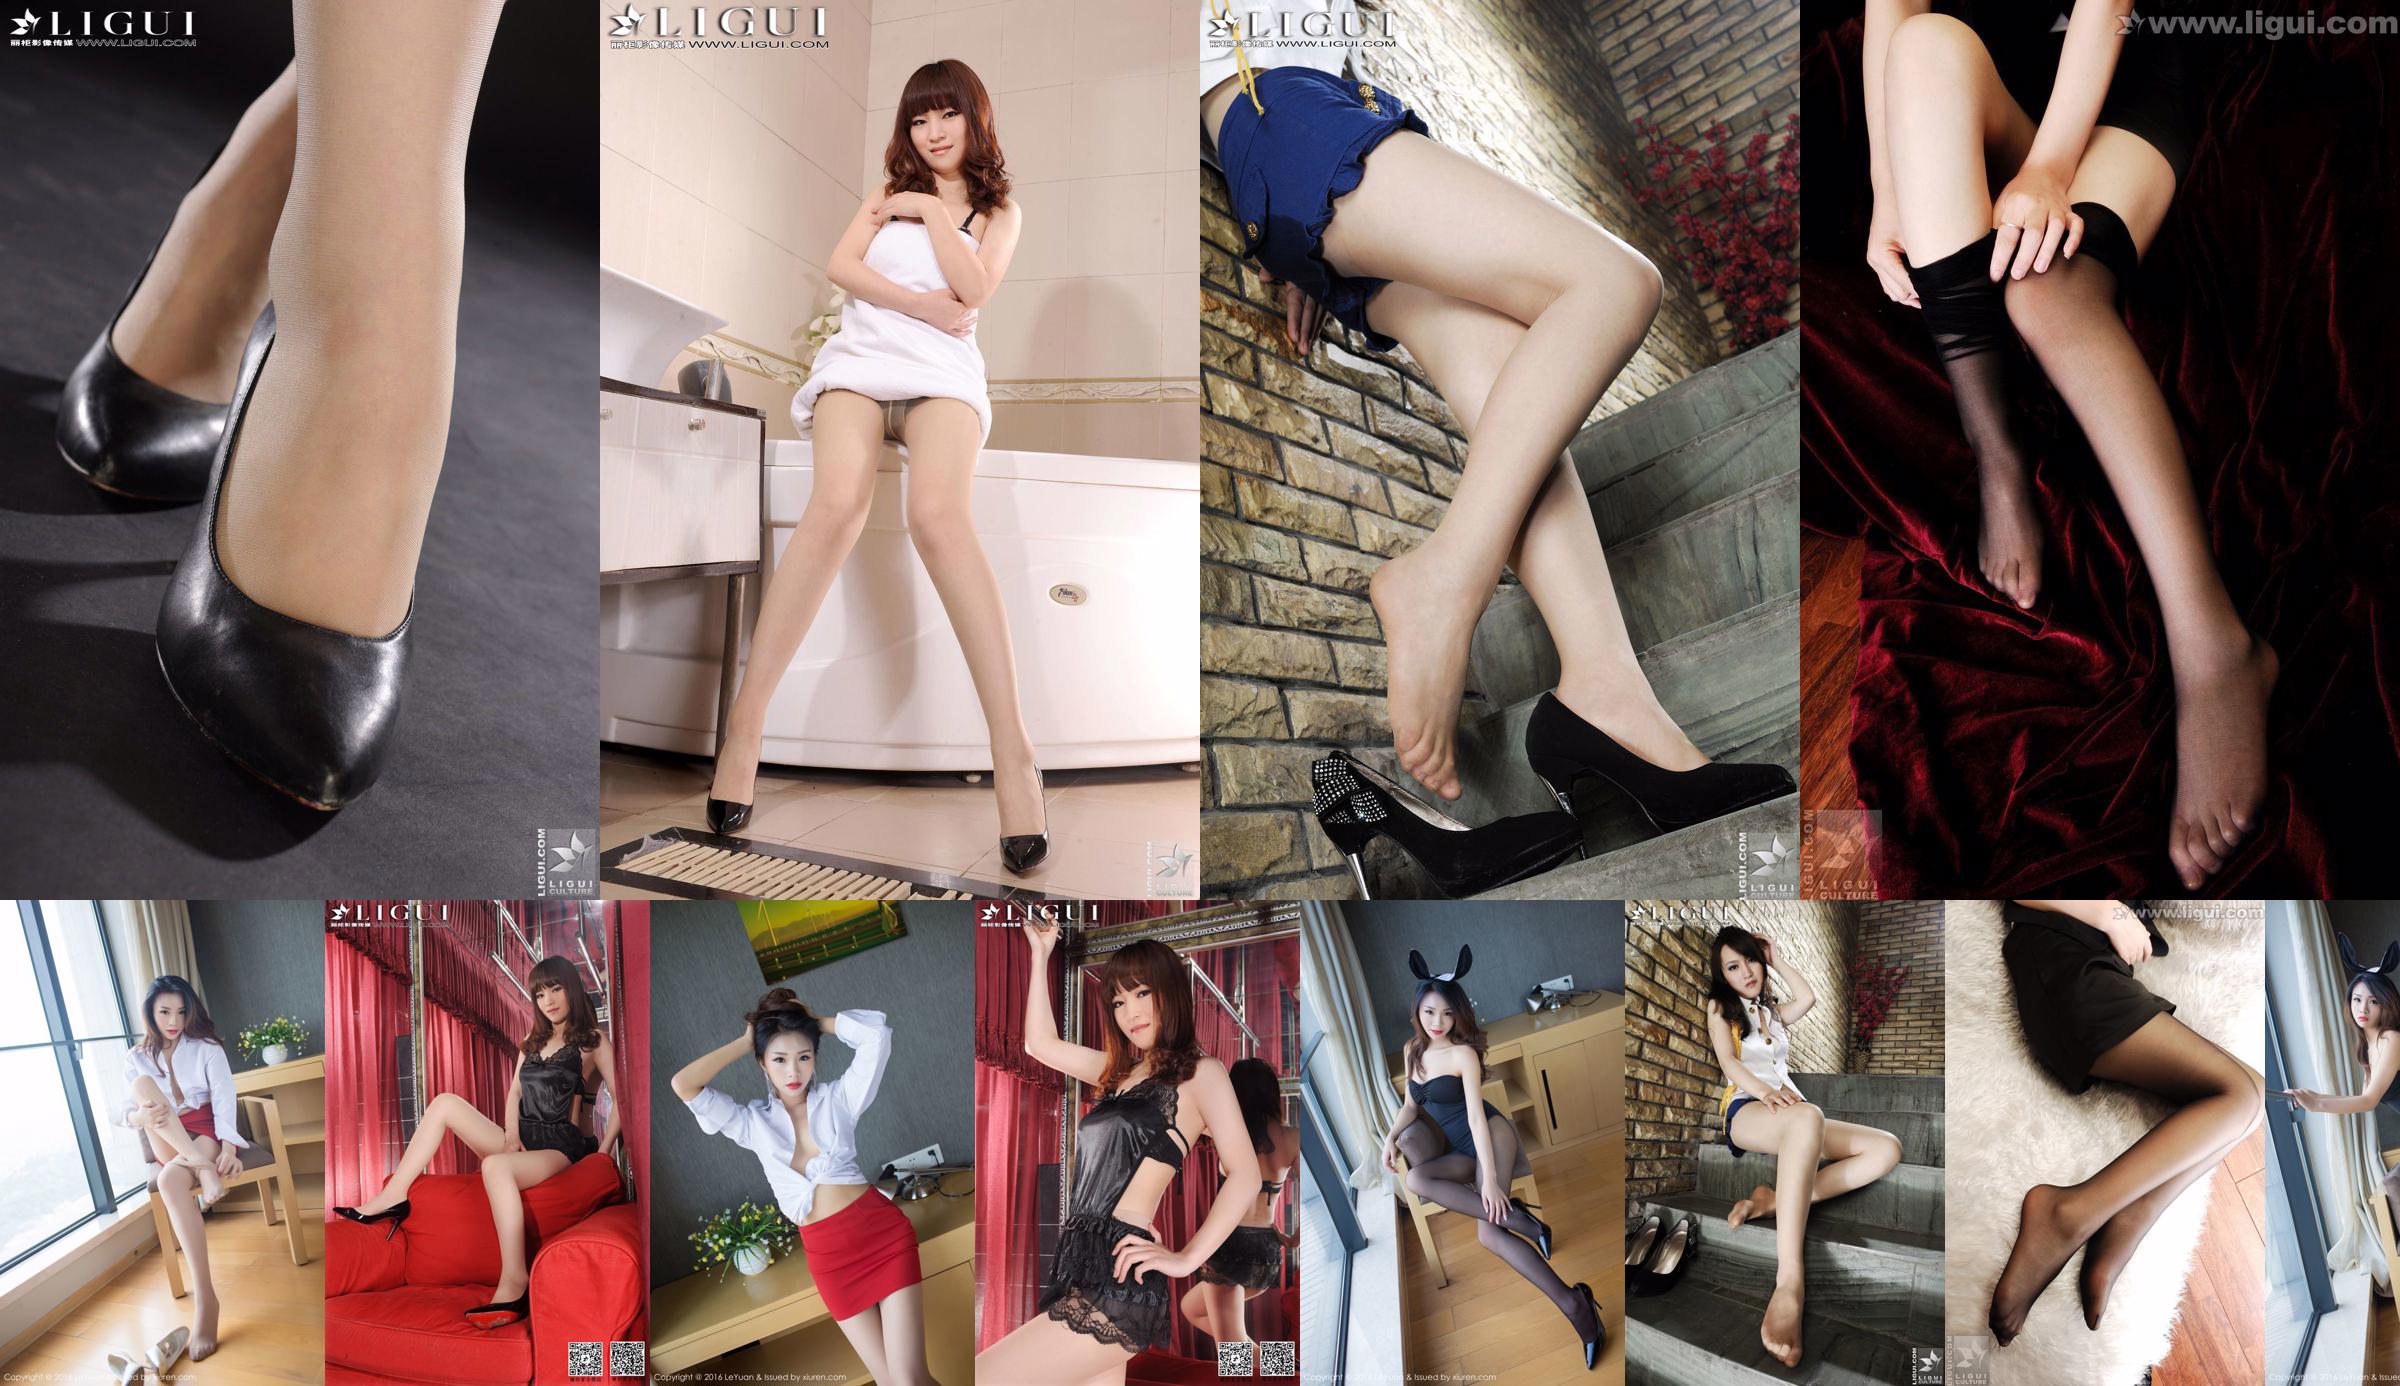 Model Tina "Lace Dudou + Meat Stockings Feet" Complete Works [丽柜贵足LiGui] Beautiful legs and jade feet photo pictures No.a28a76 Page 1